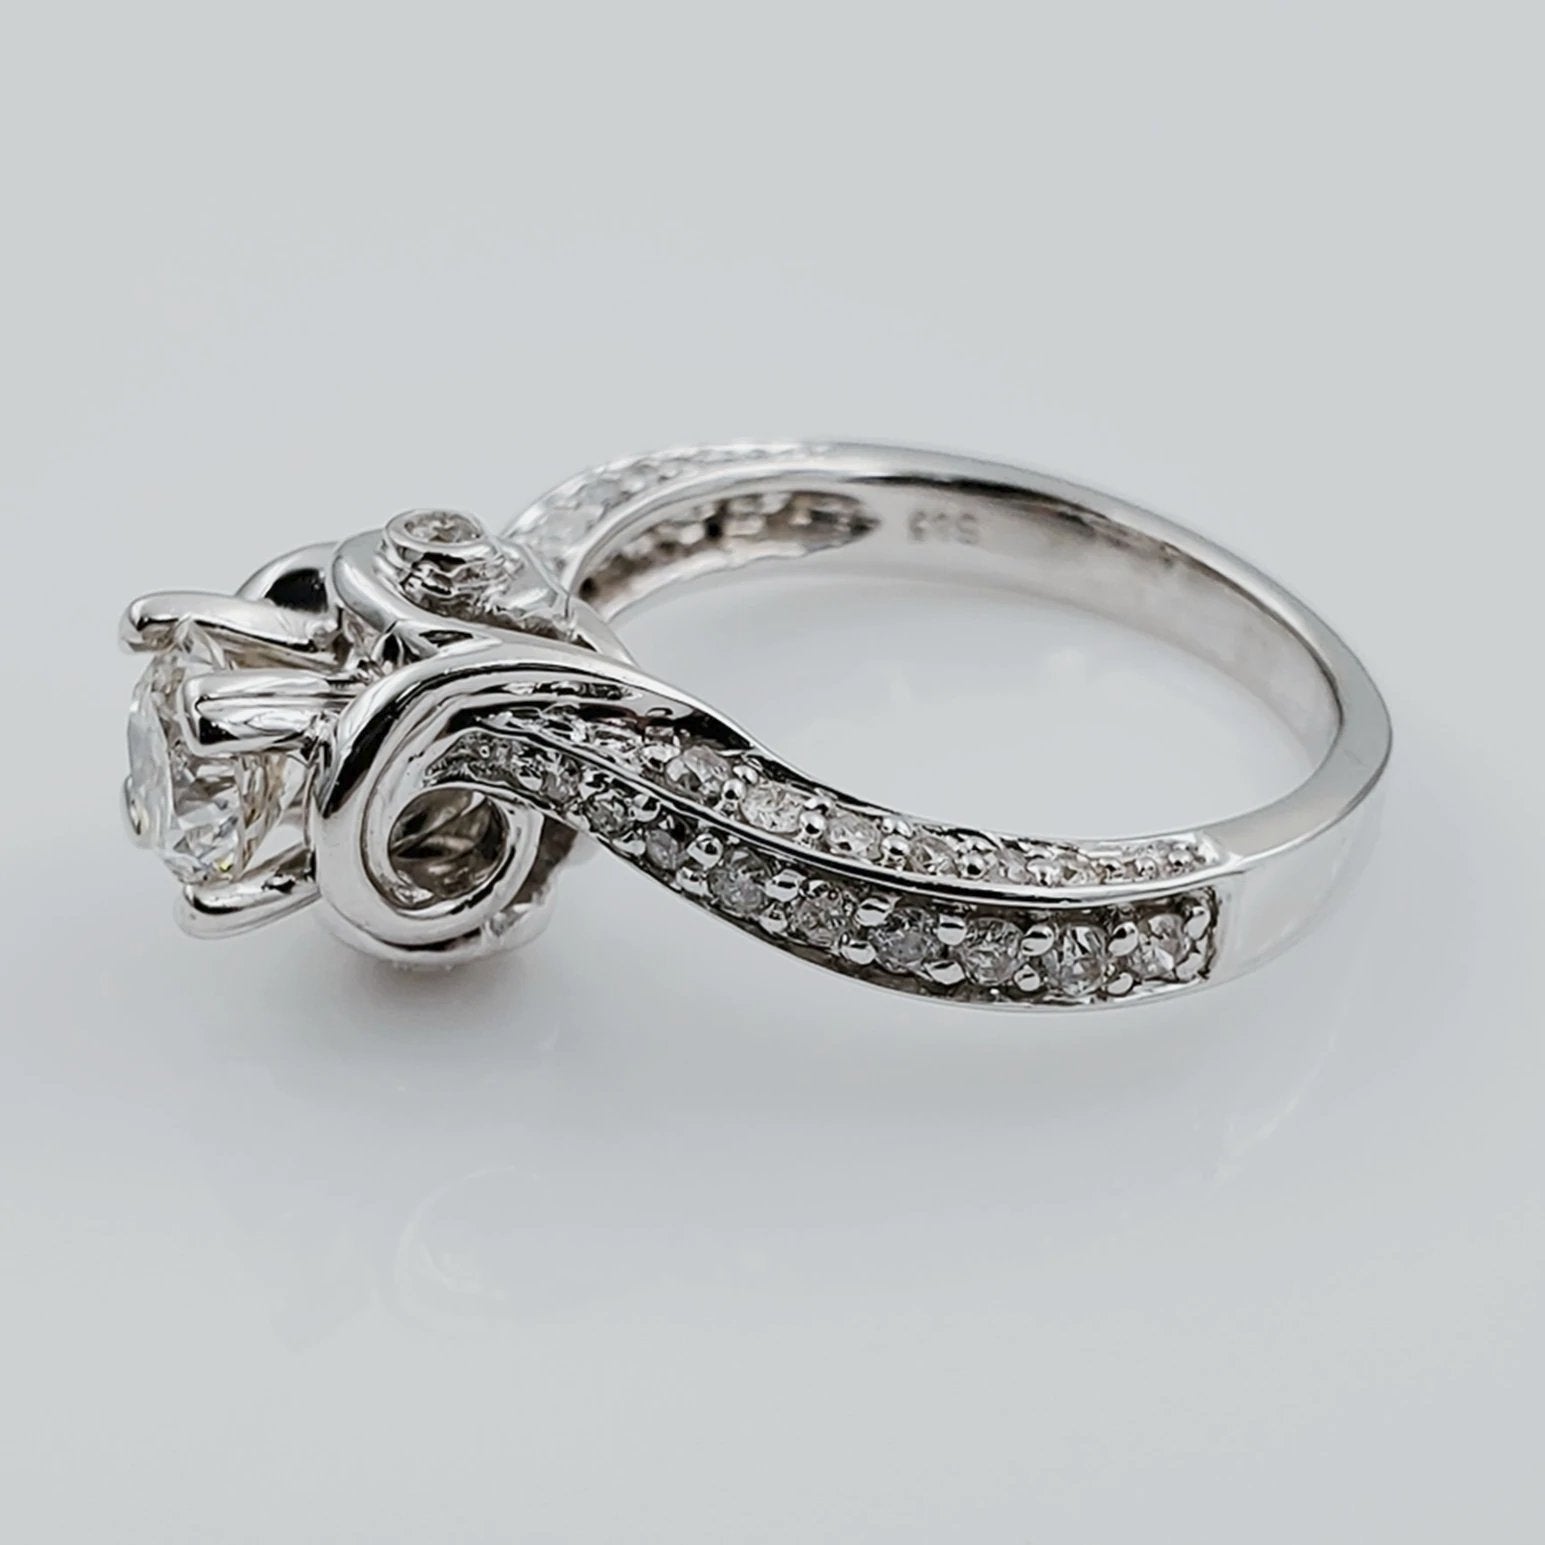 Women's 14K White Gold with 0.58 CT Round Center Diamond (SI2 Color I) 4.7 GR Total Weight Wedding Ring. (Size: 6.00)